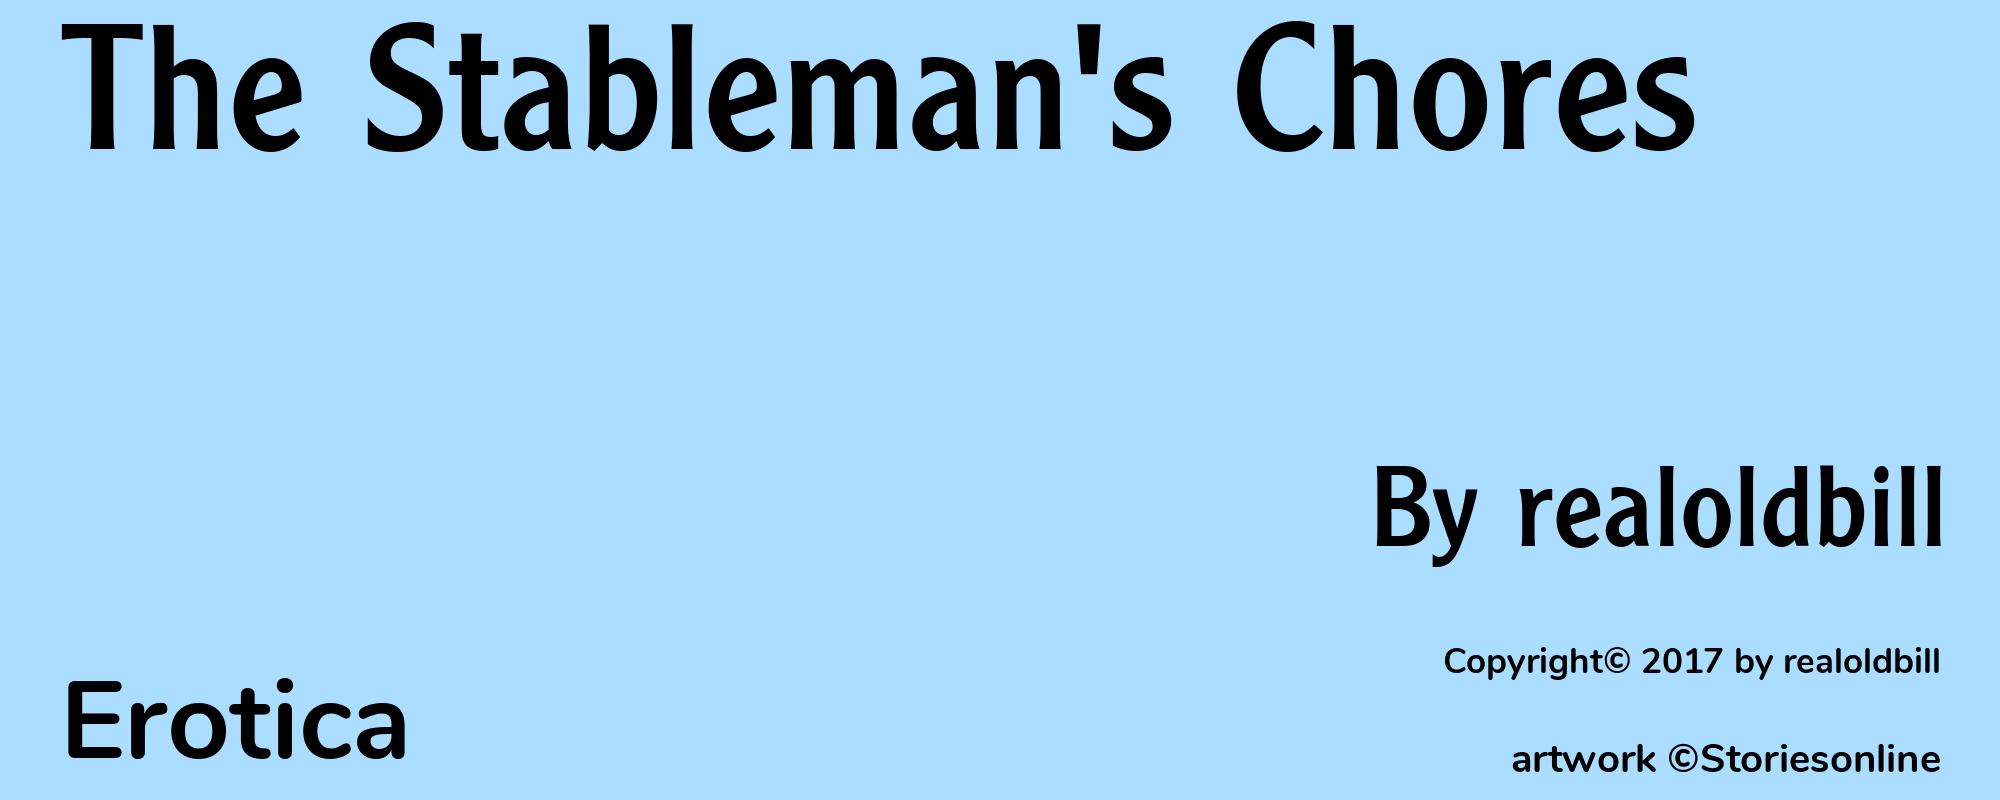 The Stableman's Chores - Cover